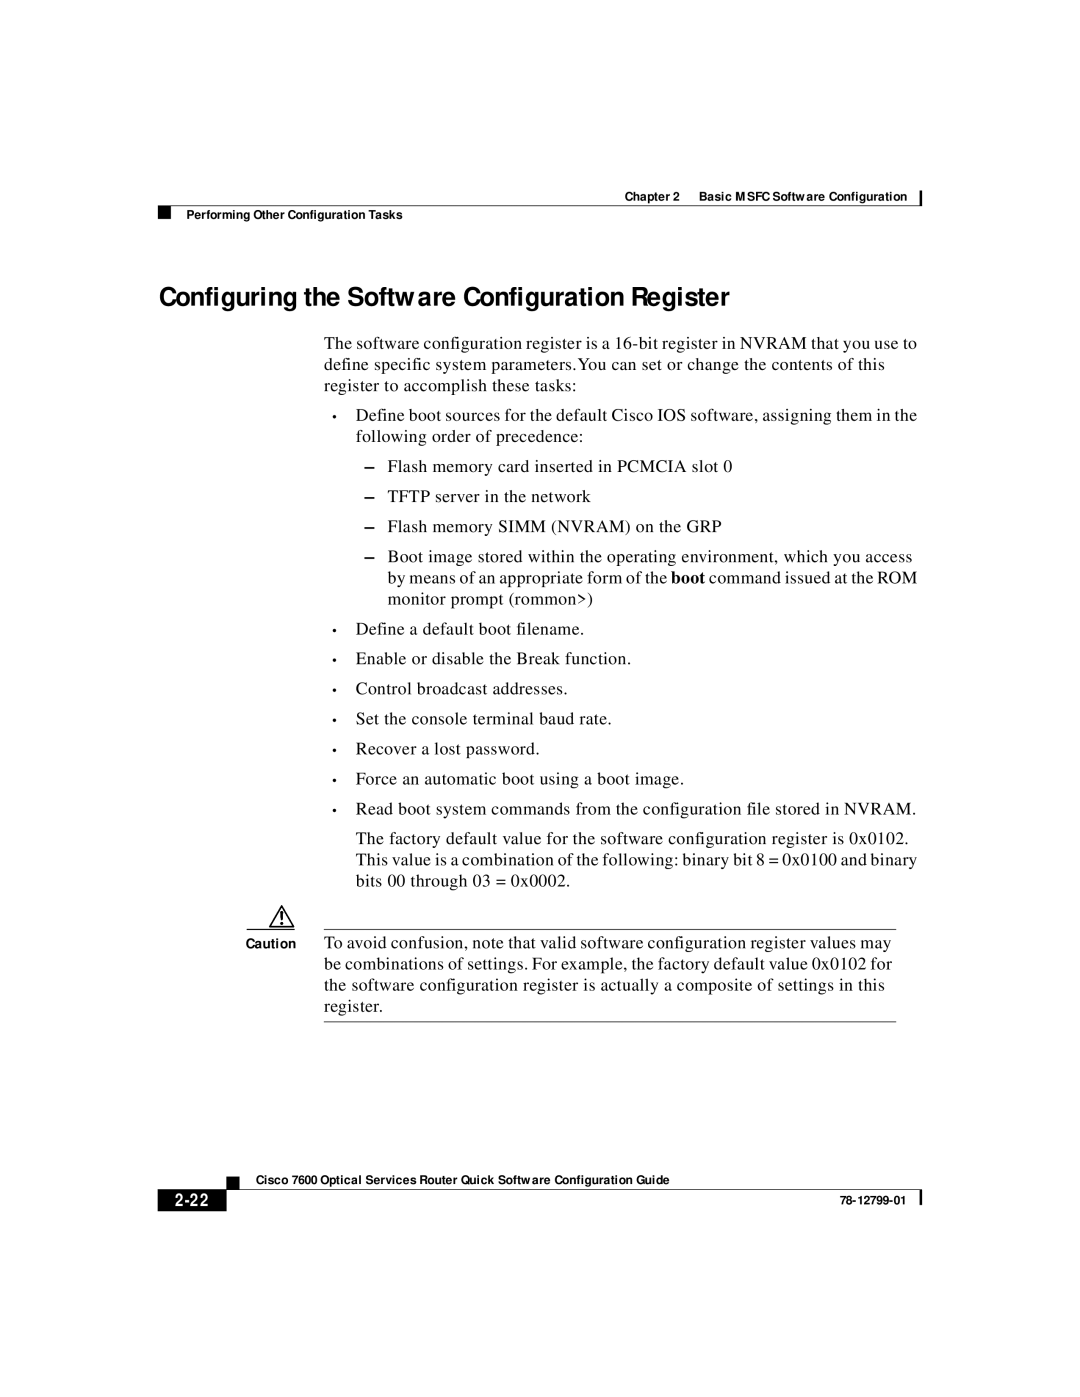 Cisco Systems 7600 manual Configuring the Software Configuration Register, 2-22 